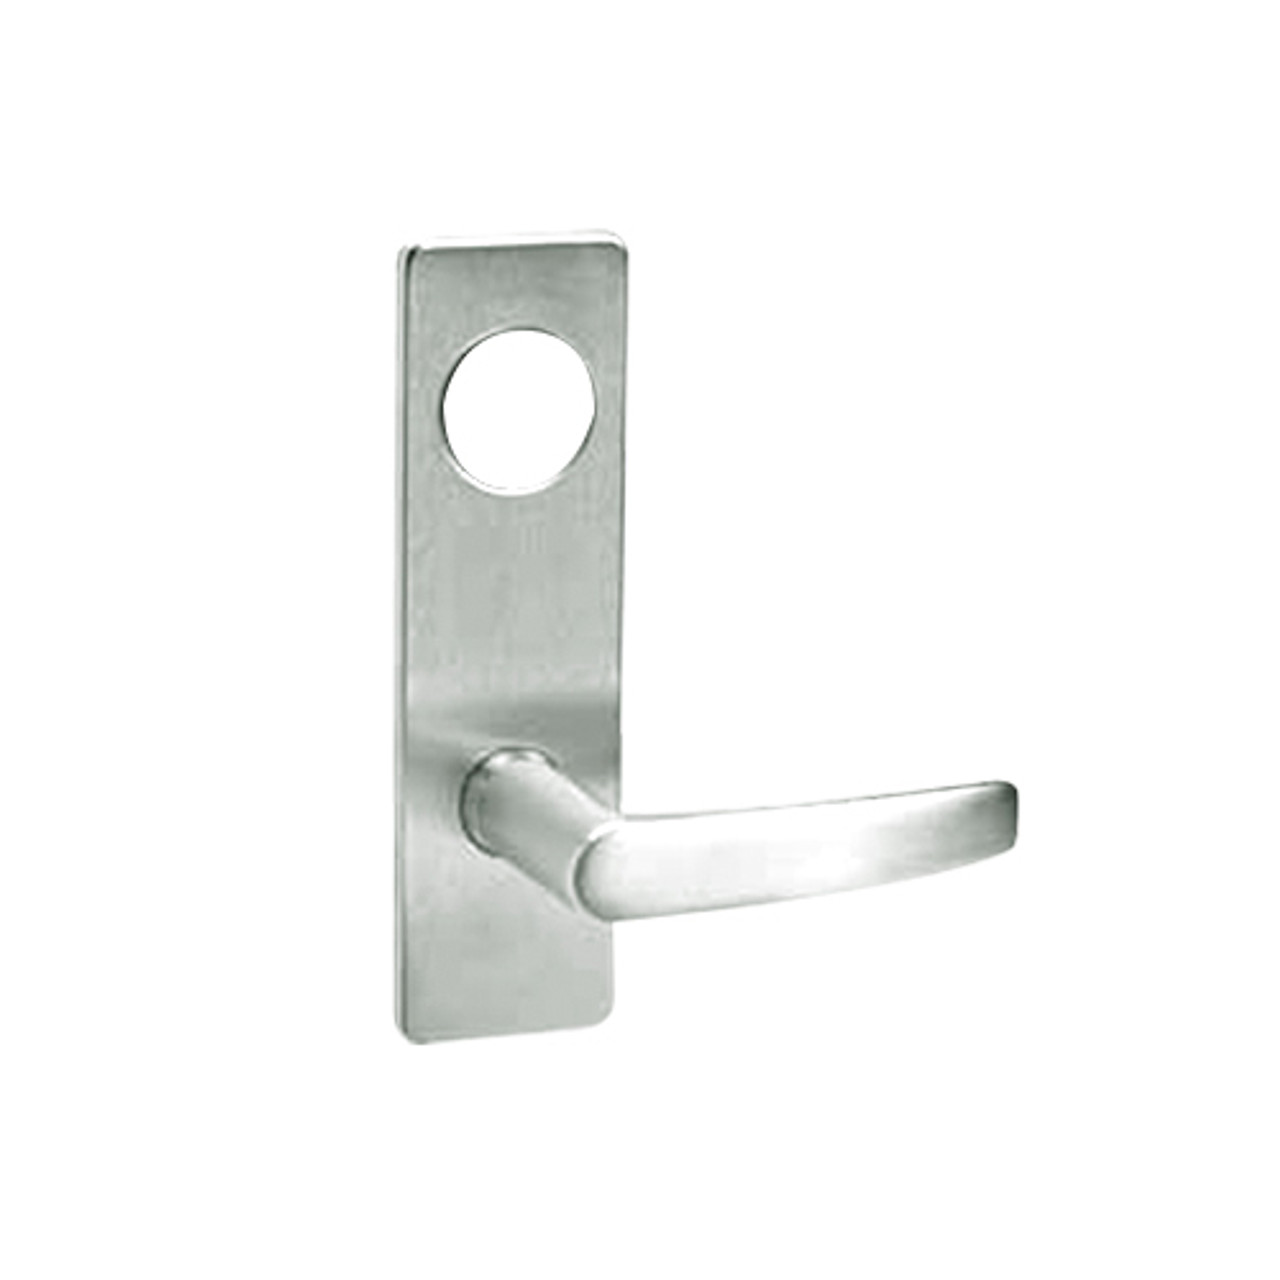 ML2022-ASN-618 Corbin Russwin ML2000 Series Mortise Store Door Locksets with Armstrong Lever with Deadbolt in Bright Nickel